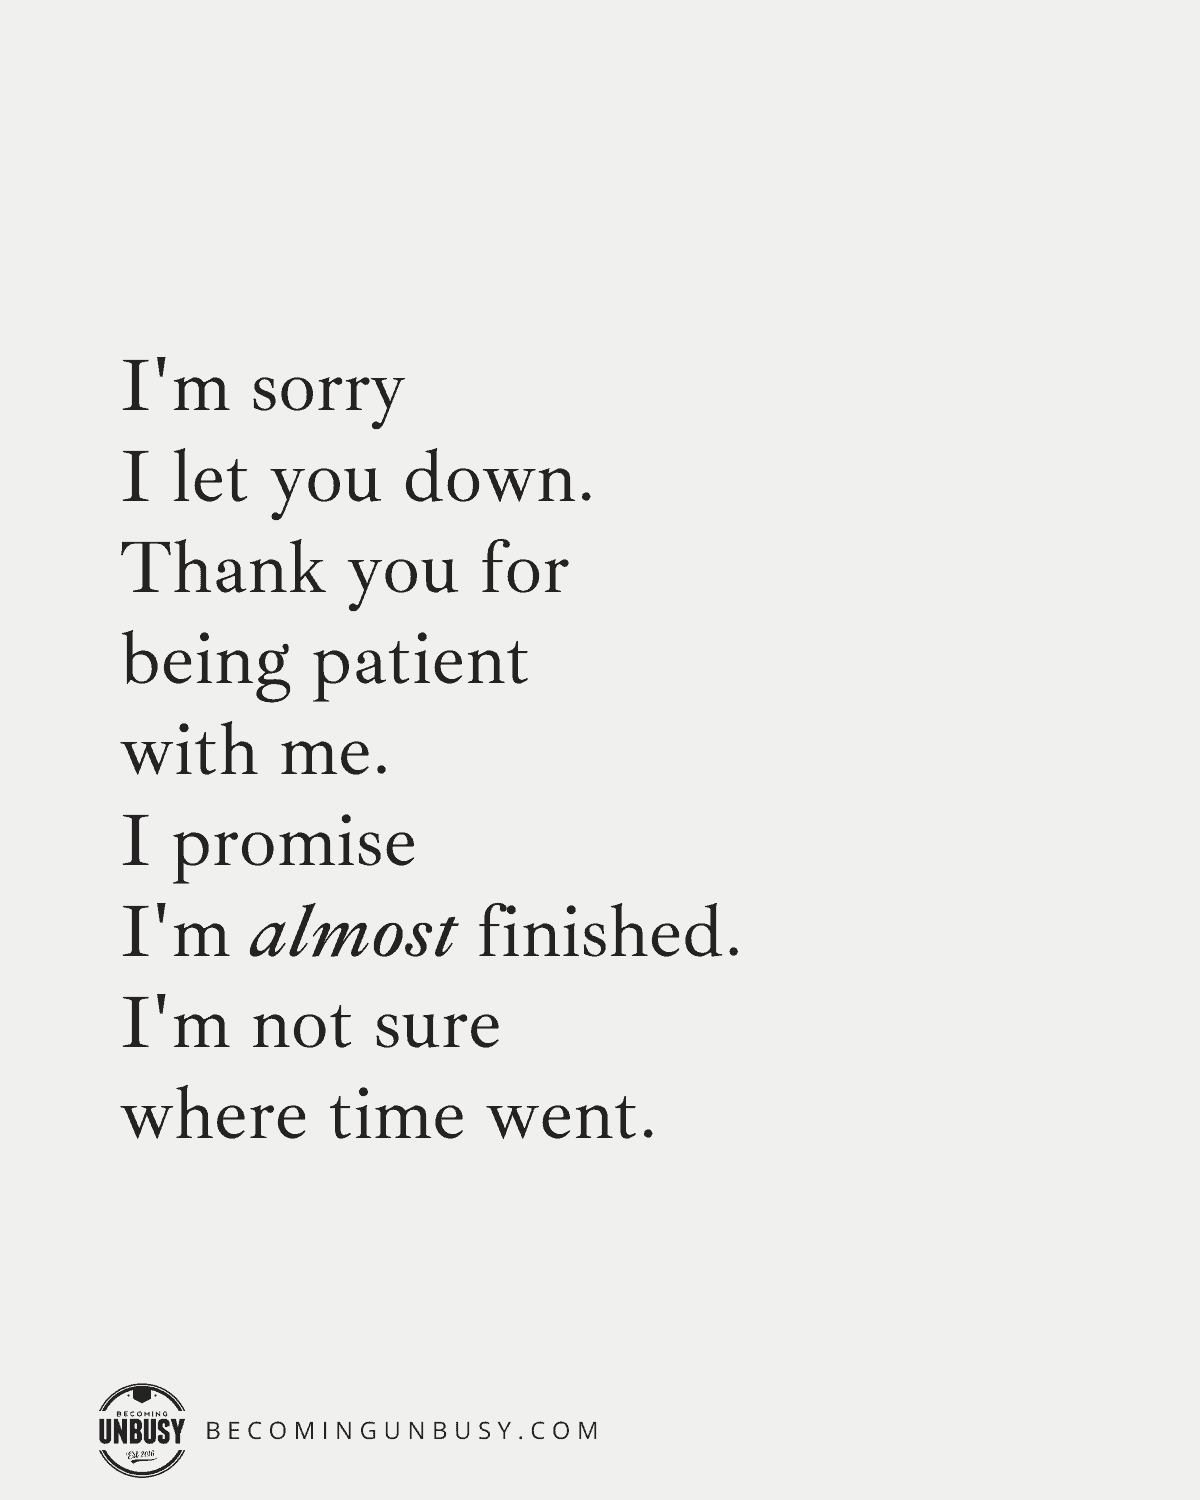 I'm sorry I let you down.
Thank you for being patient with me.
I promise, I'm almost finished.
I'm not sure where time went.